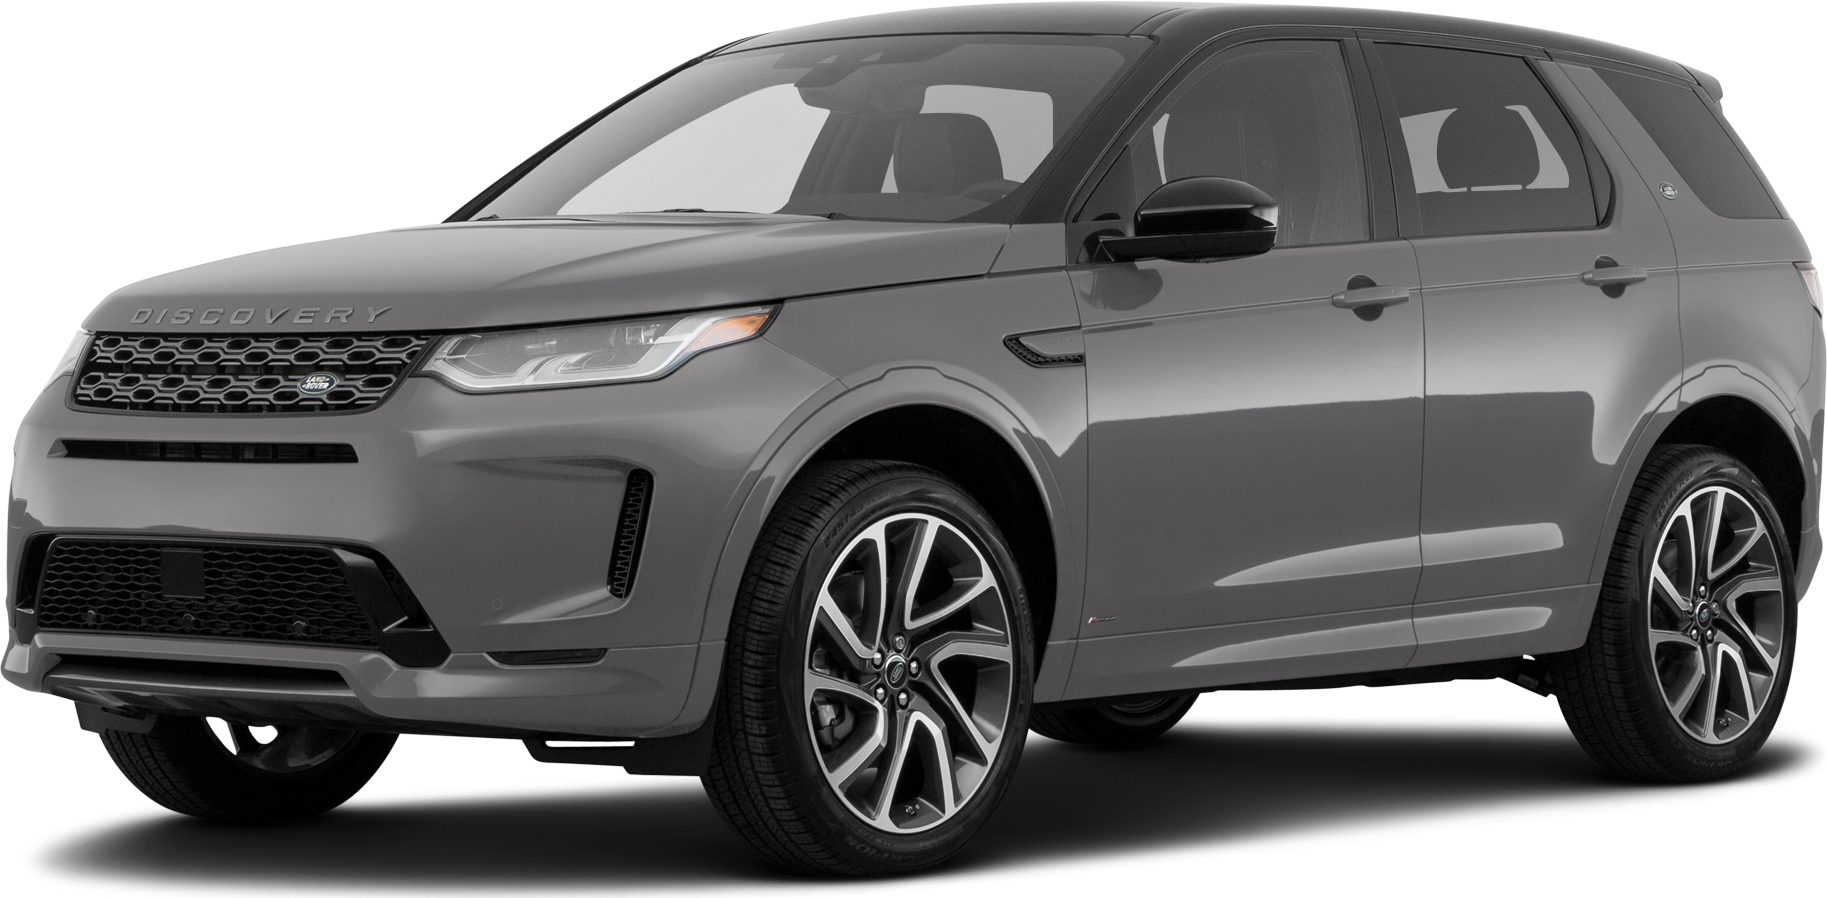 https://file.kelleybluebookimages.com/kbb/base/evox/CP/14436/2021-Land%20Rover-Discovery%20Sport-front_14436_032_1827x898_1BN_cropped.png